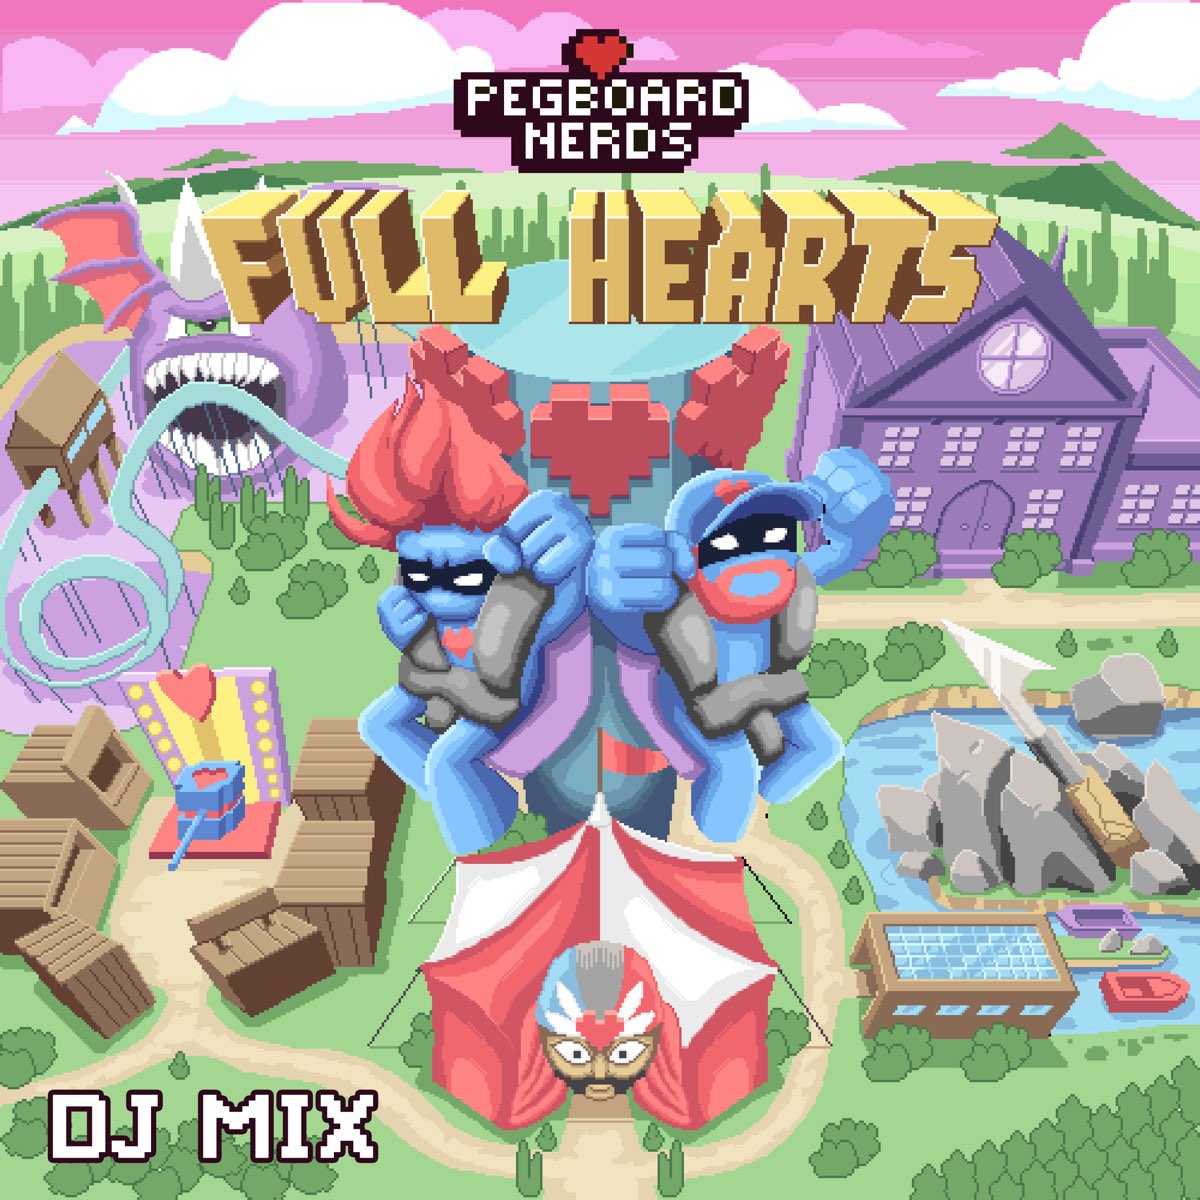 Full Hearts (DJ Mix) by Pegboard Nerds on Apple Music